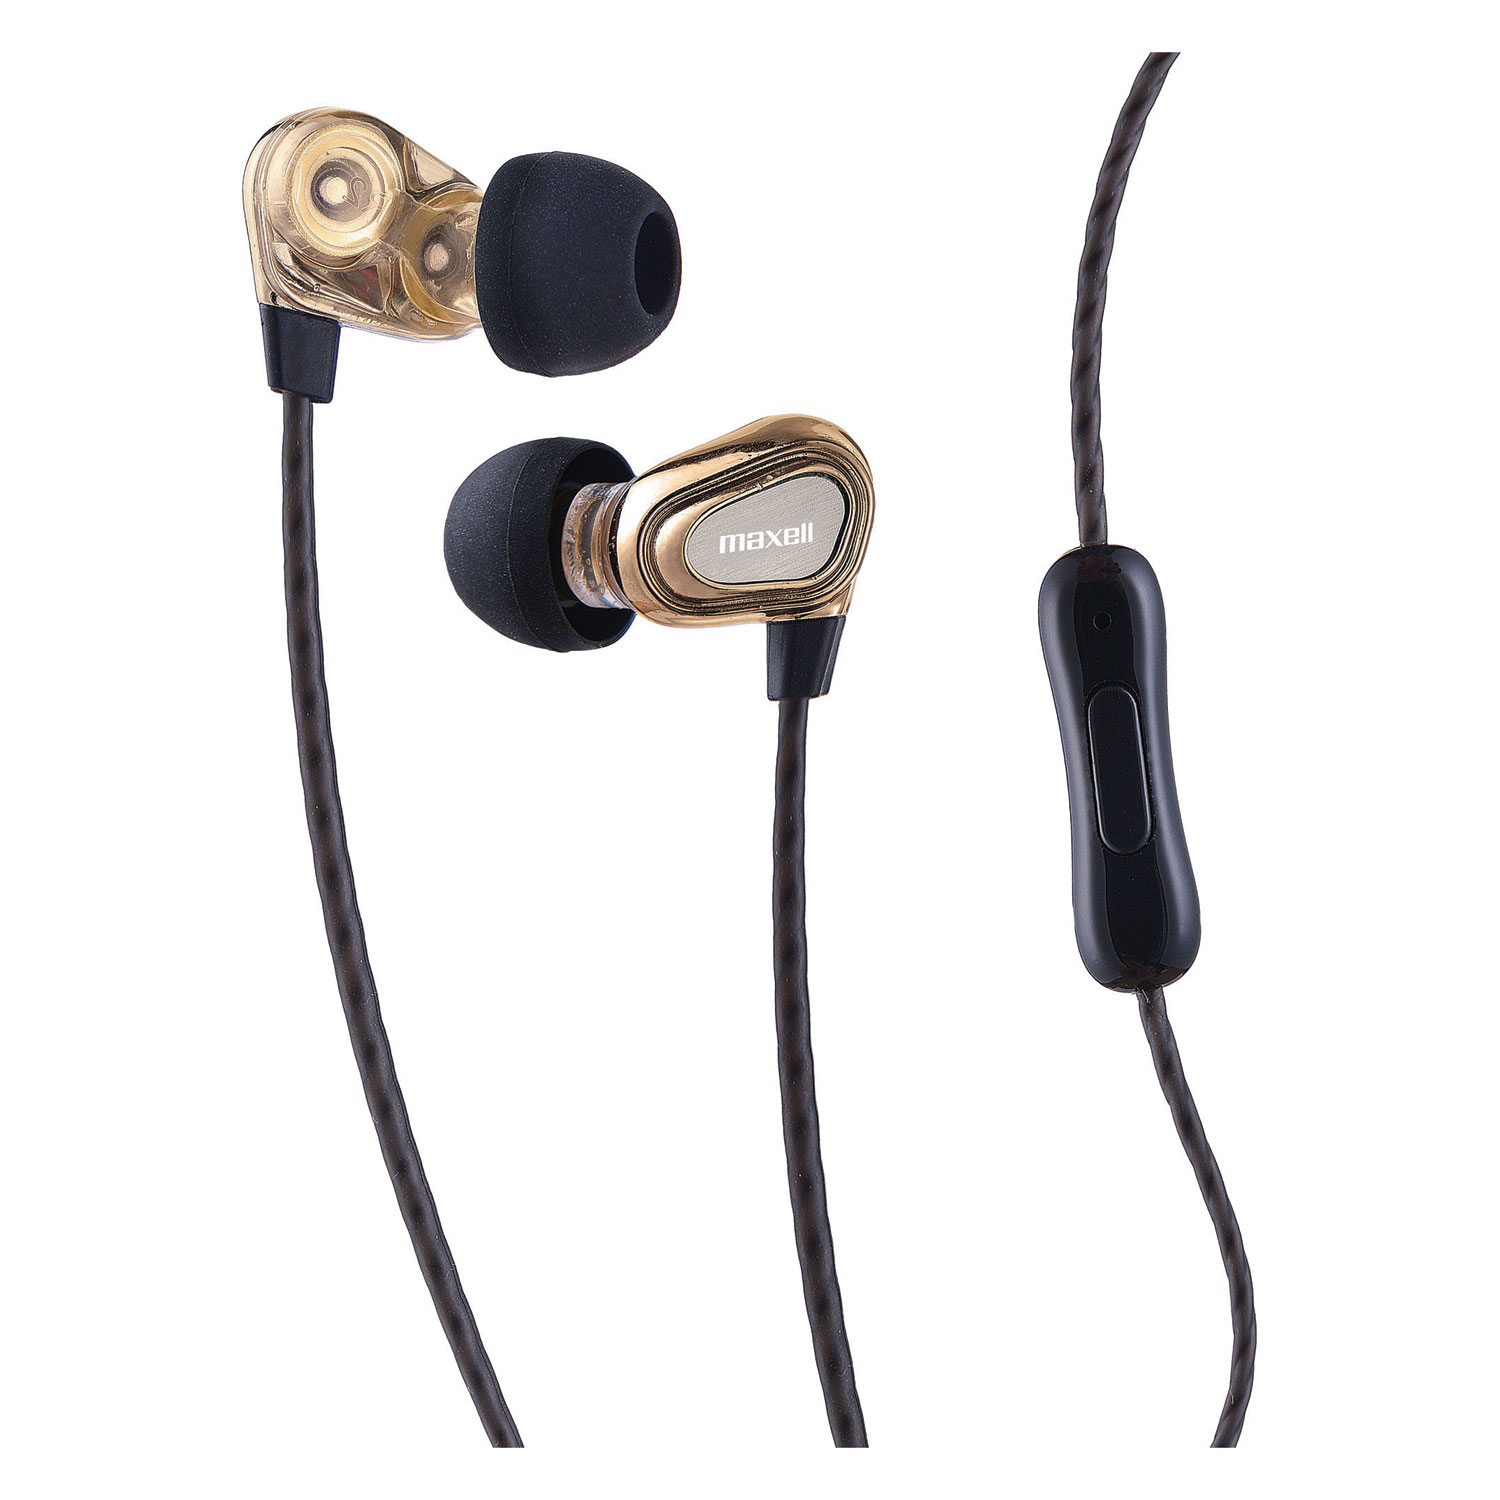  Maxell 199771 Dual Driver Earbuds with MIC, Gold (MAX199771) 